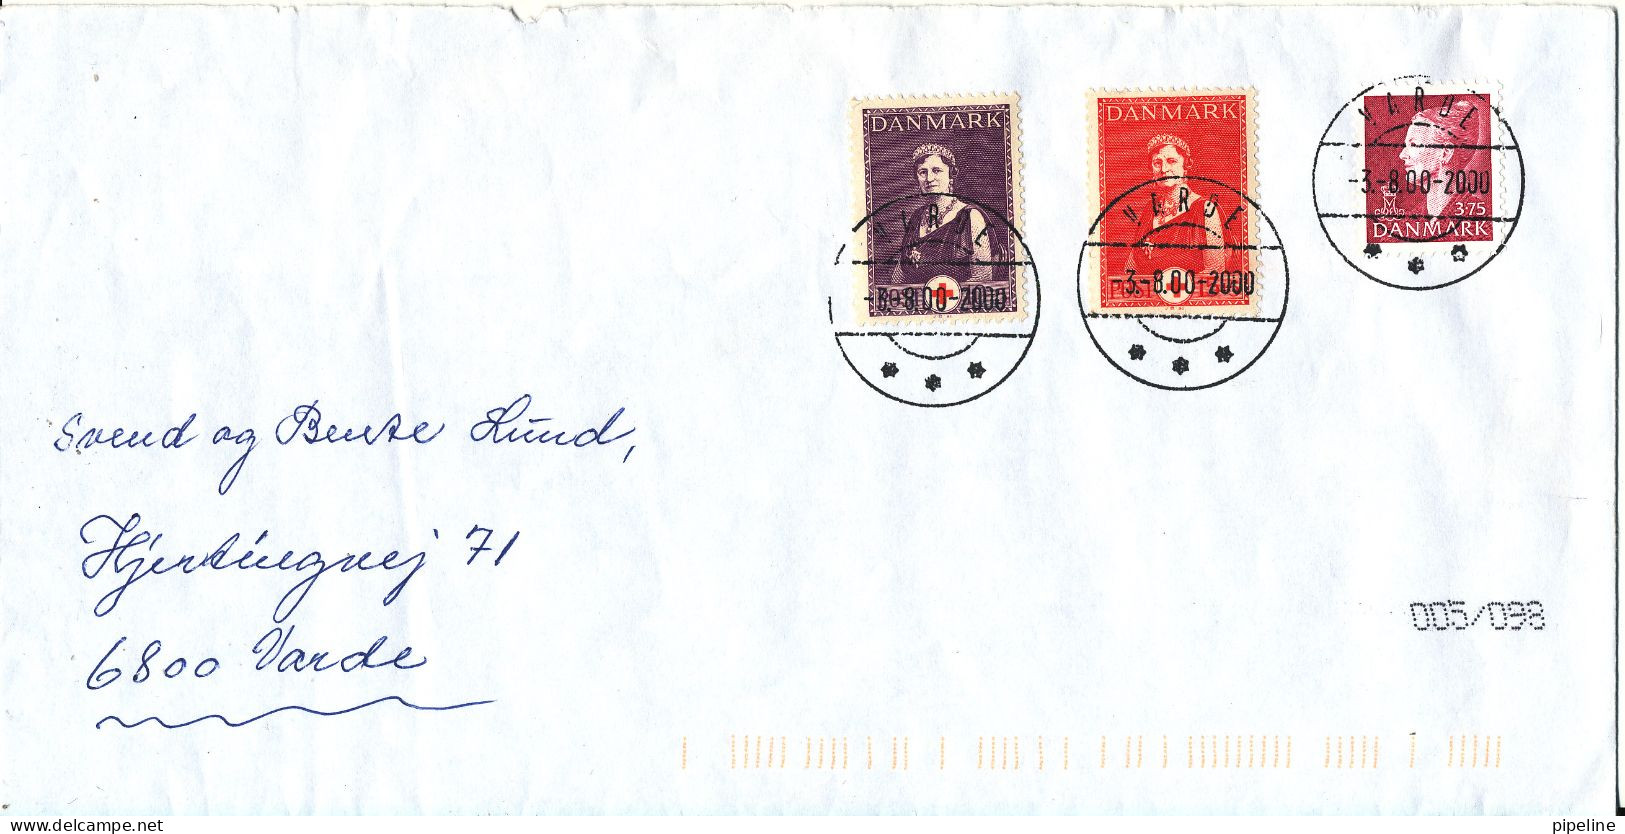 Denmark Cover 3-8-2000 With Some Older Danish Stamps The Flap On The Backside Of The Cover Is Missing - Briefe U. Dokumente